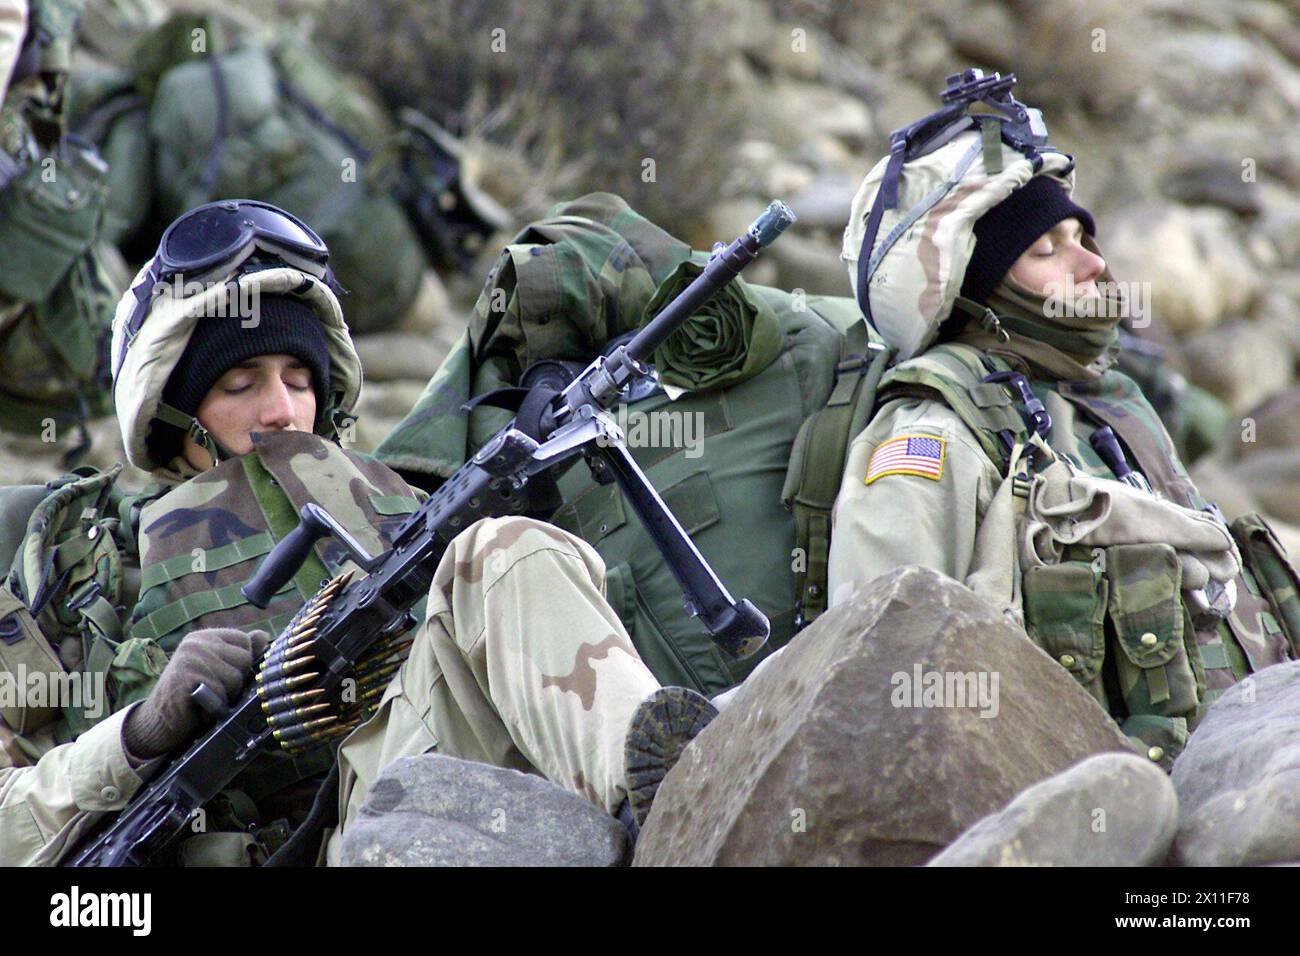 Original Caption: Soldiers from the 1st Battalion, 187th Infantry Regiment, 101st Airborne Division (Air Assault), rest during a break from a march toward an objective, March 4, 2002. The Soldiers are participating in Operation Anaconda, which is part of Operation Enduring Freedom (Afghanistan) Stock Photo